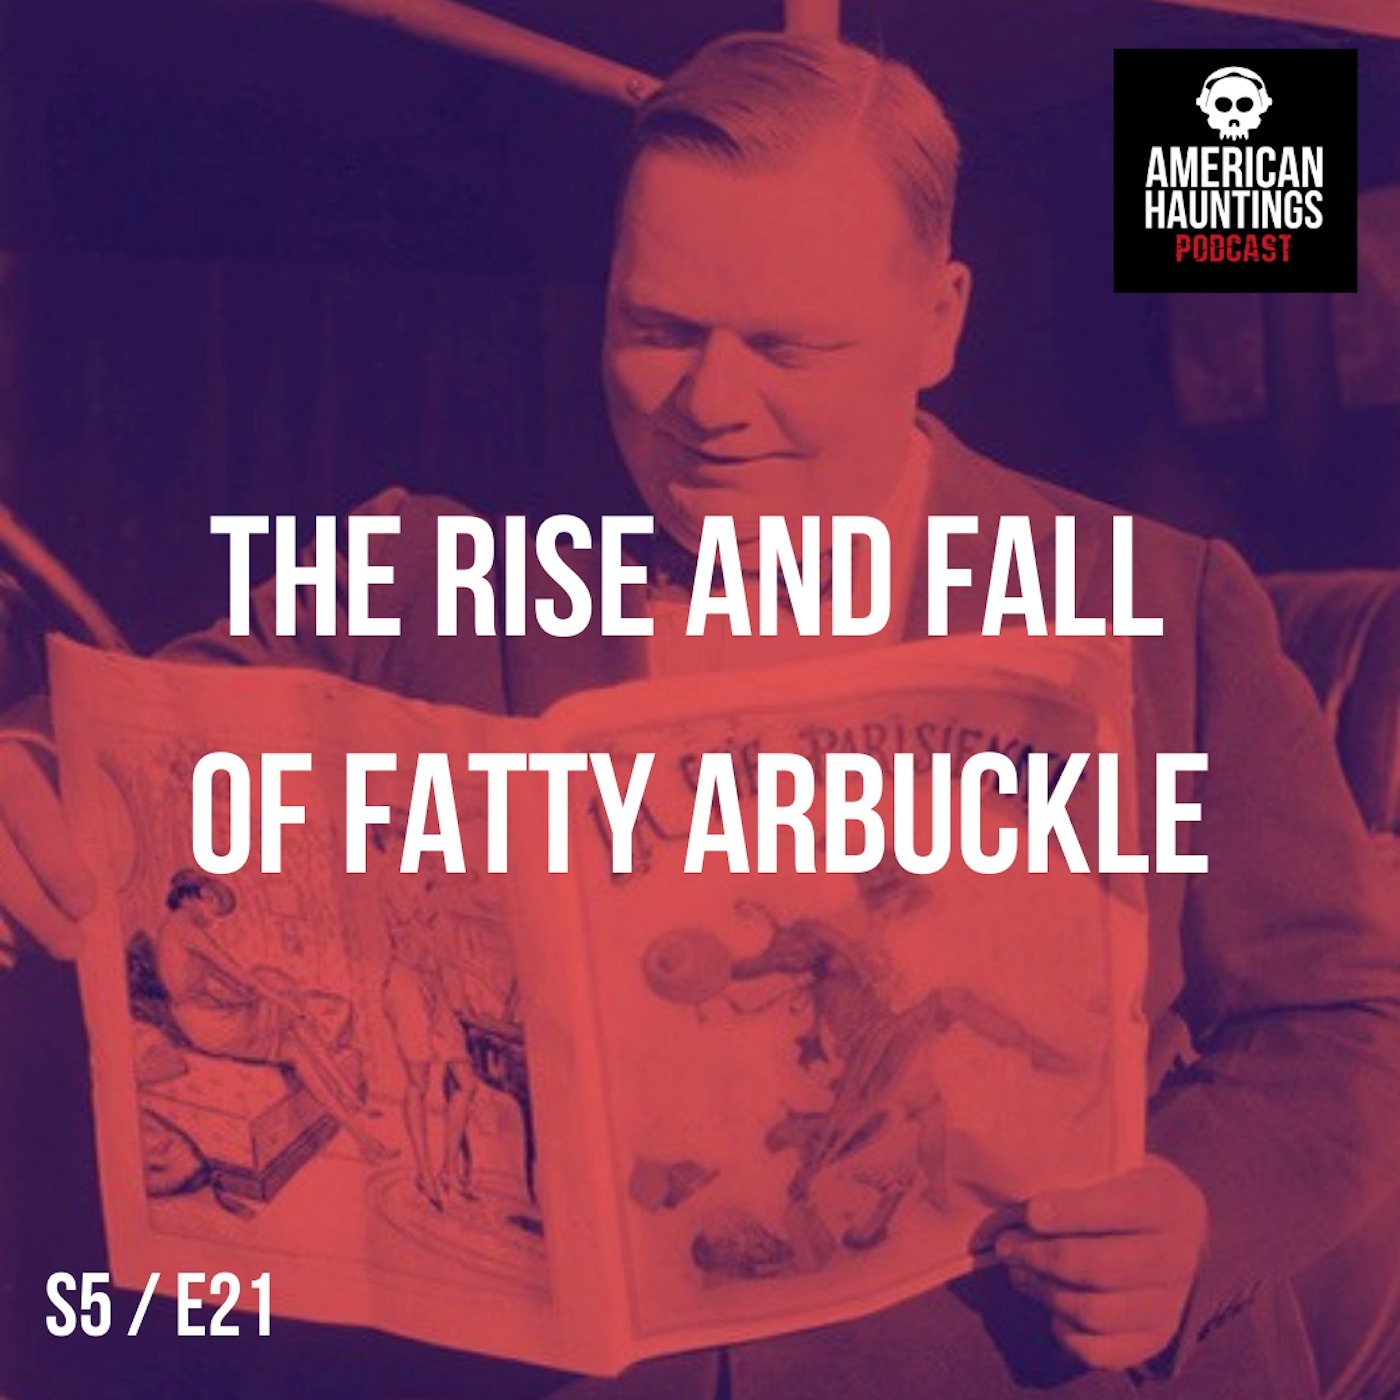 The Rise And Fall Of Fatty Arbuckle